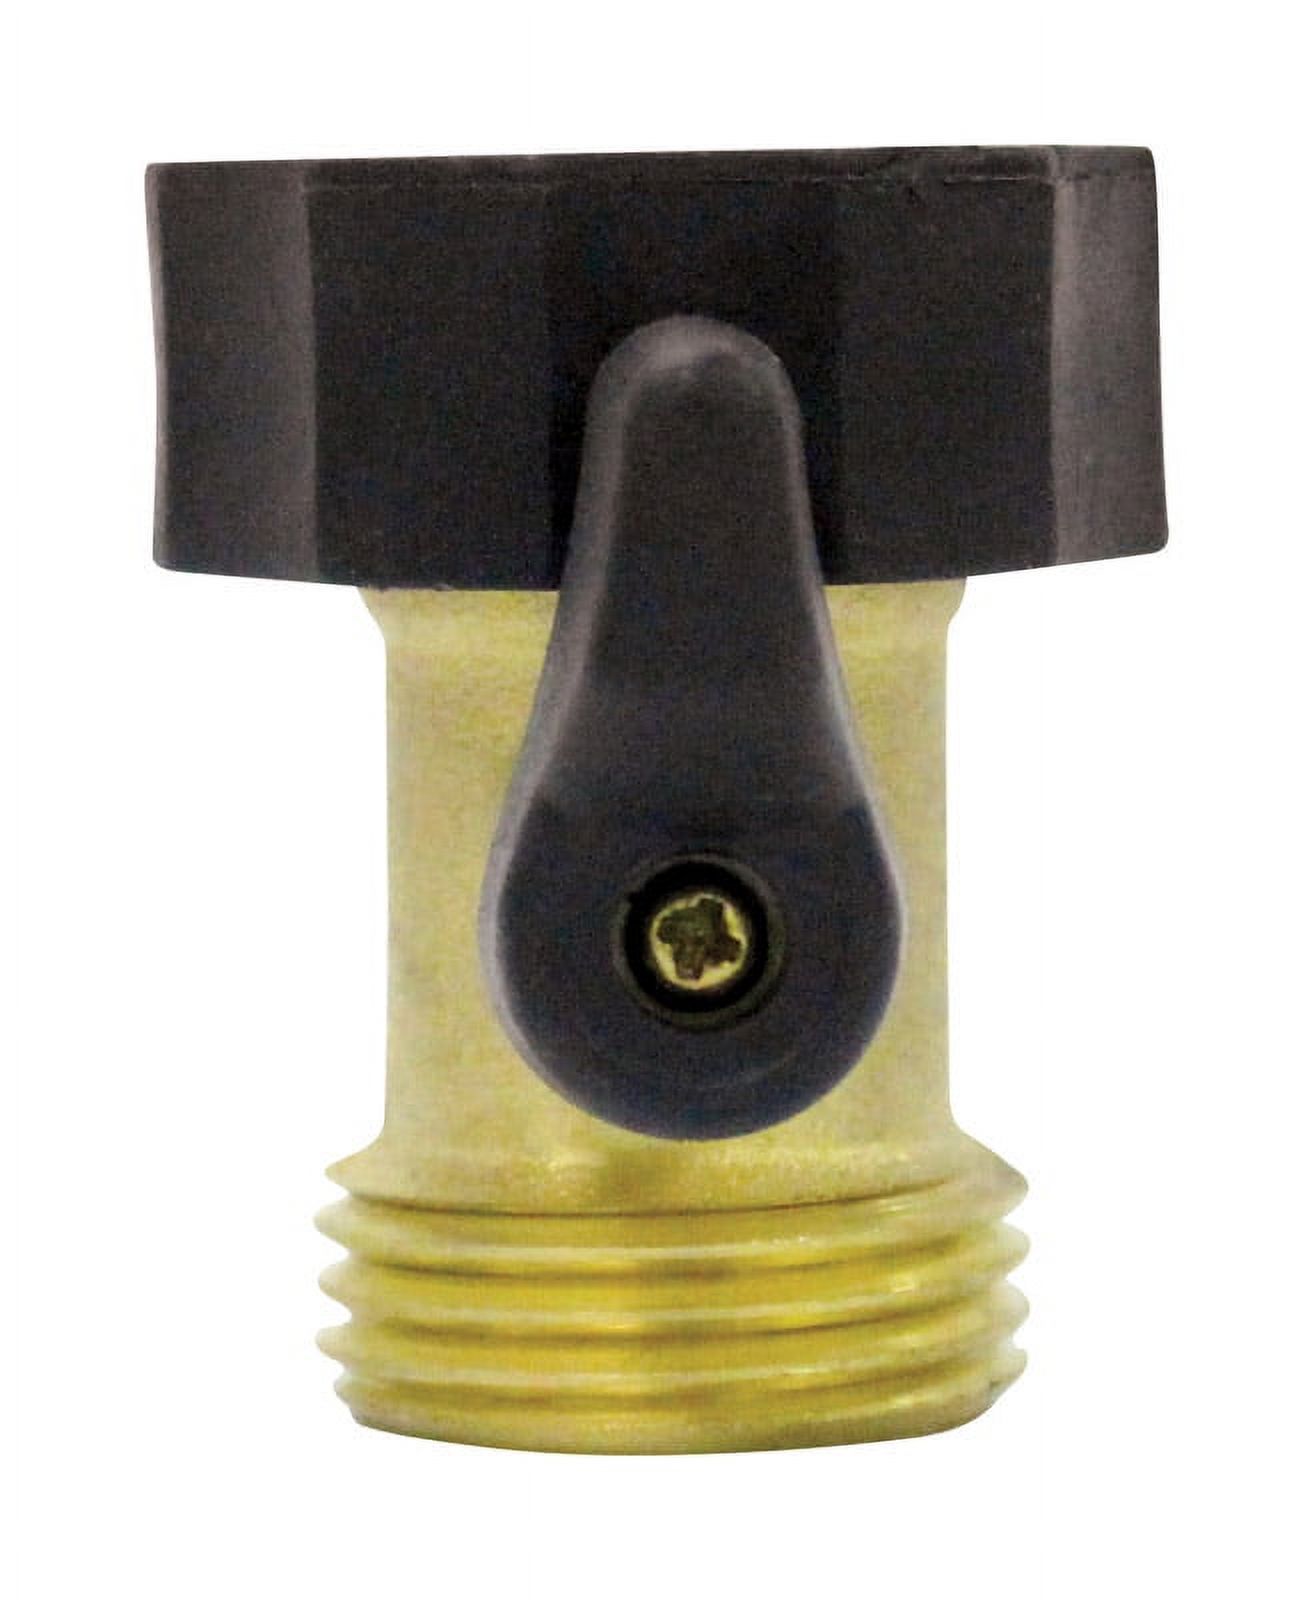 Gilmour 5/8 in. Brass Threaded Male Hose Shut-off Valve - image 2 of 2